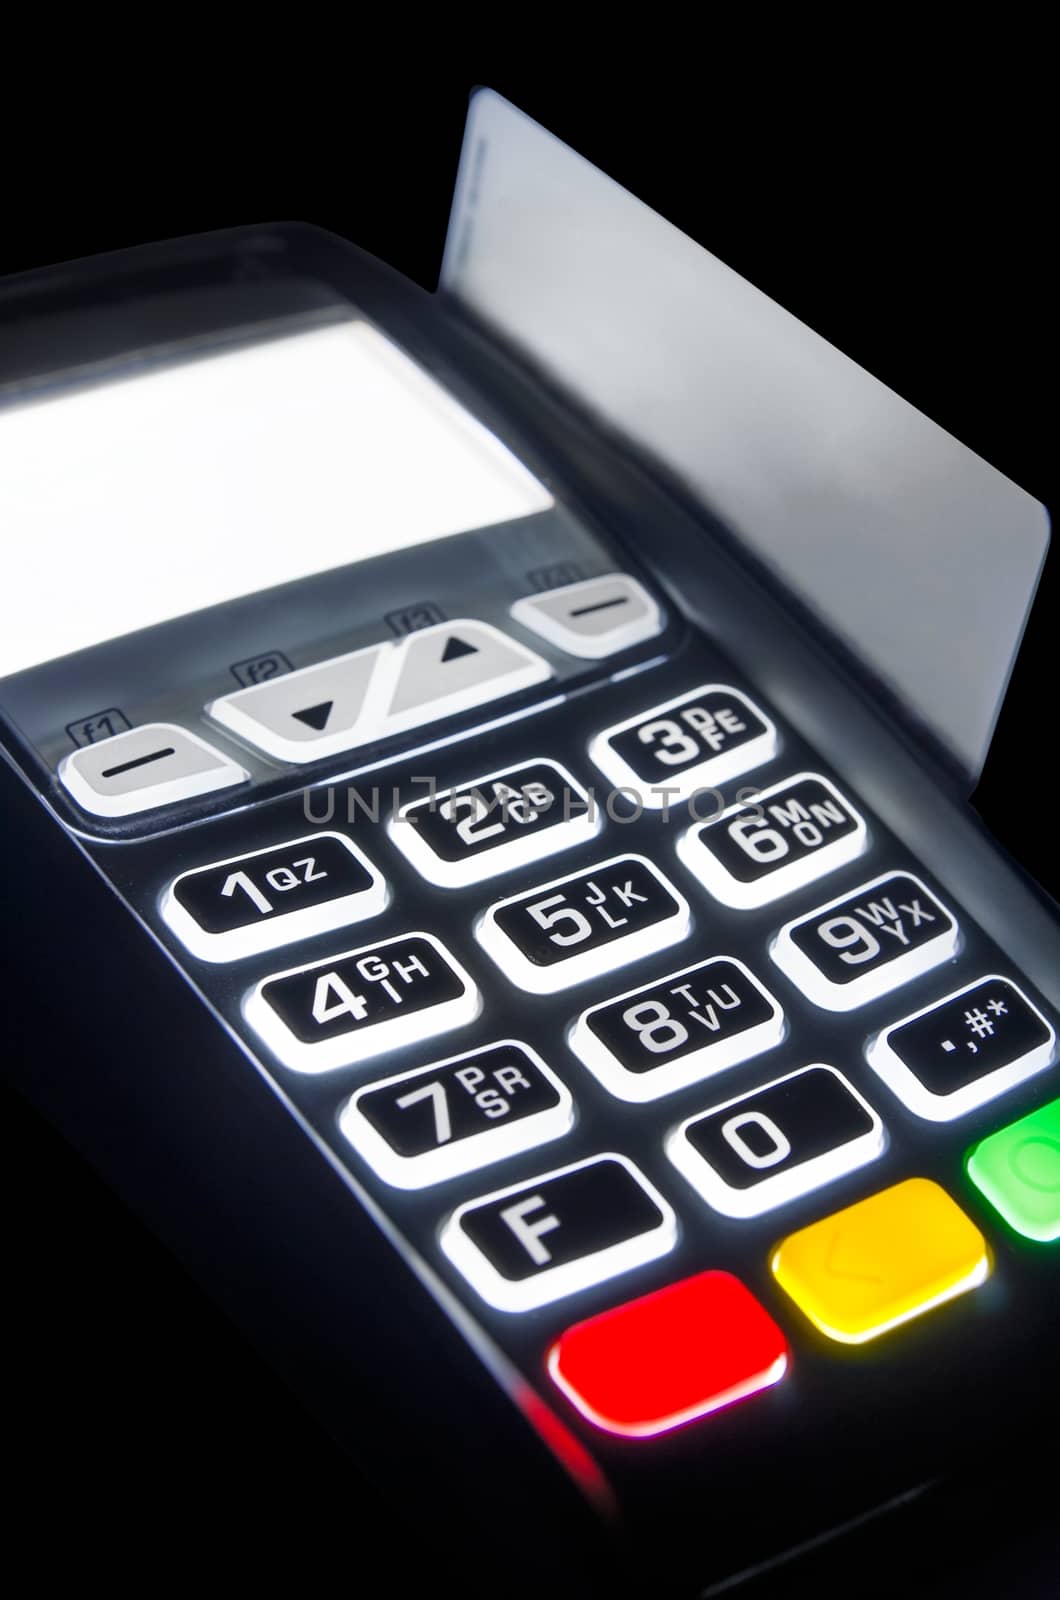 Payment terminal with lighting keypad at night